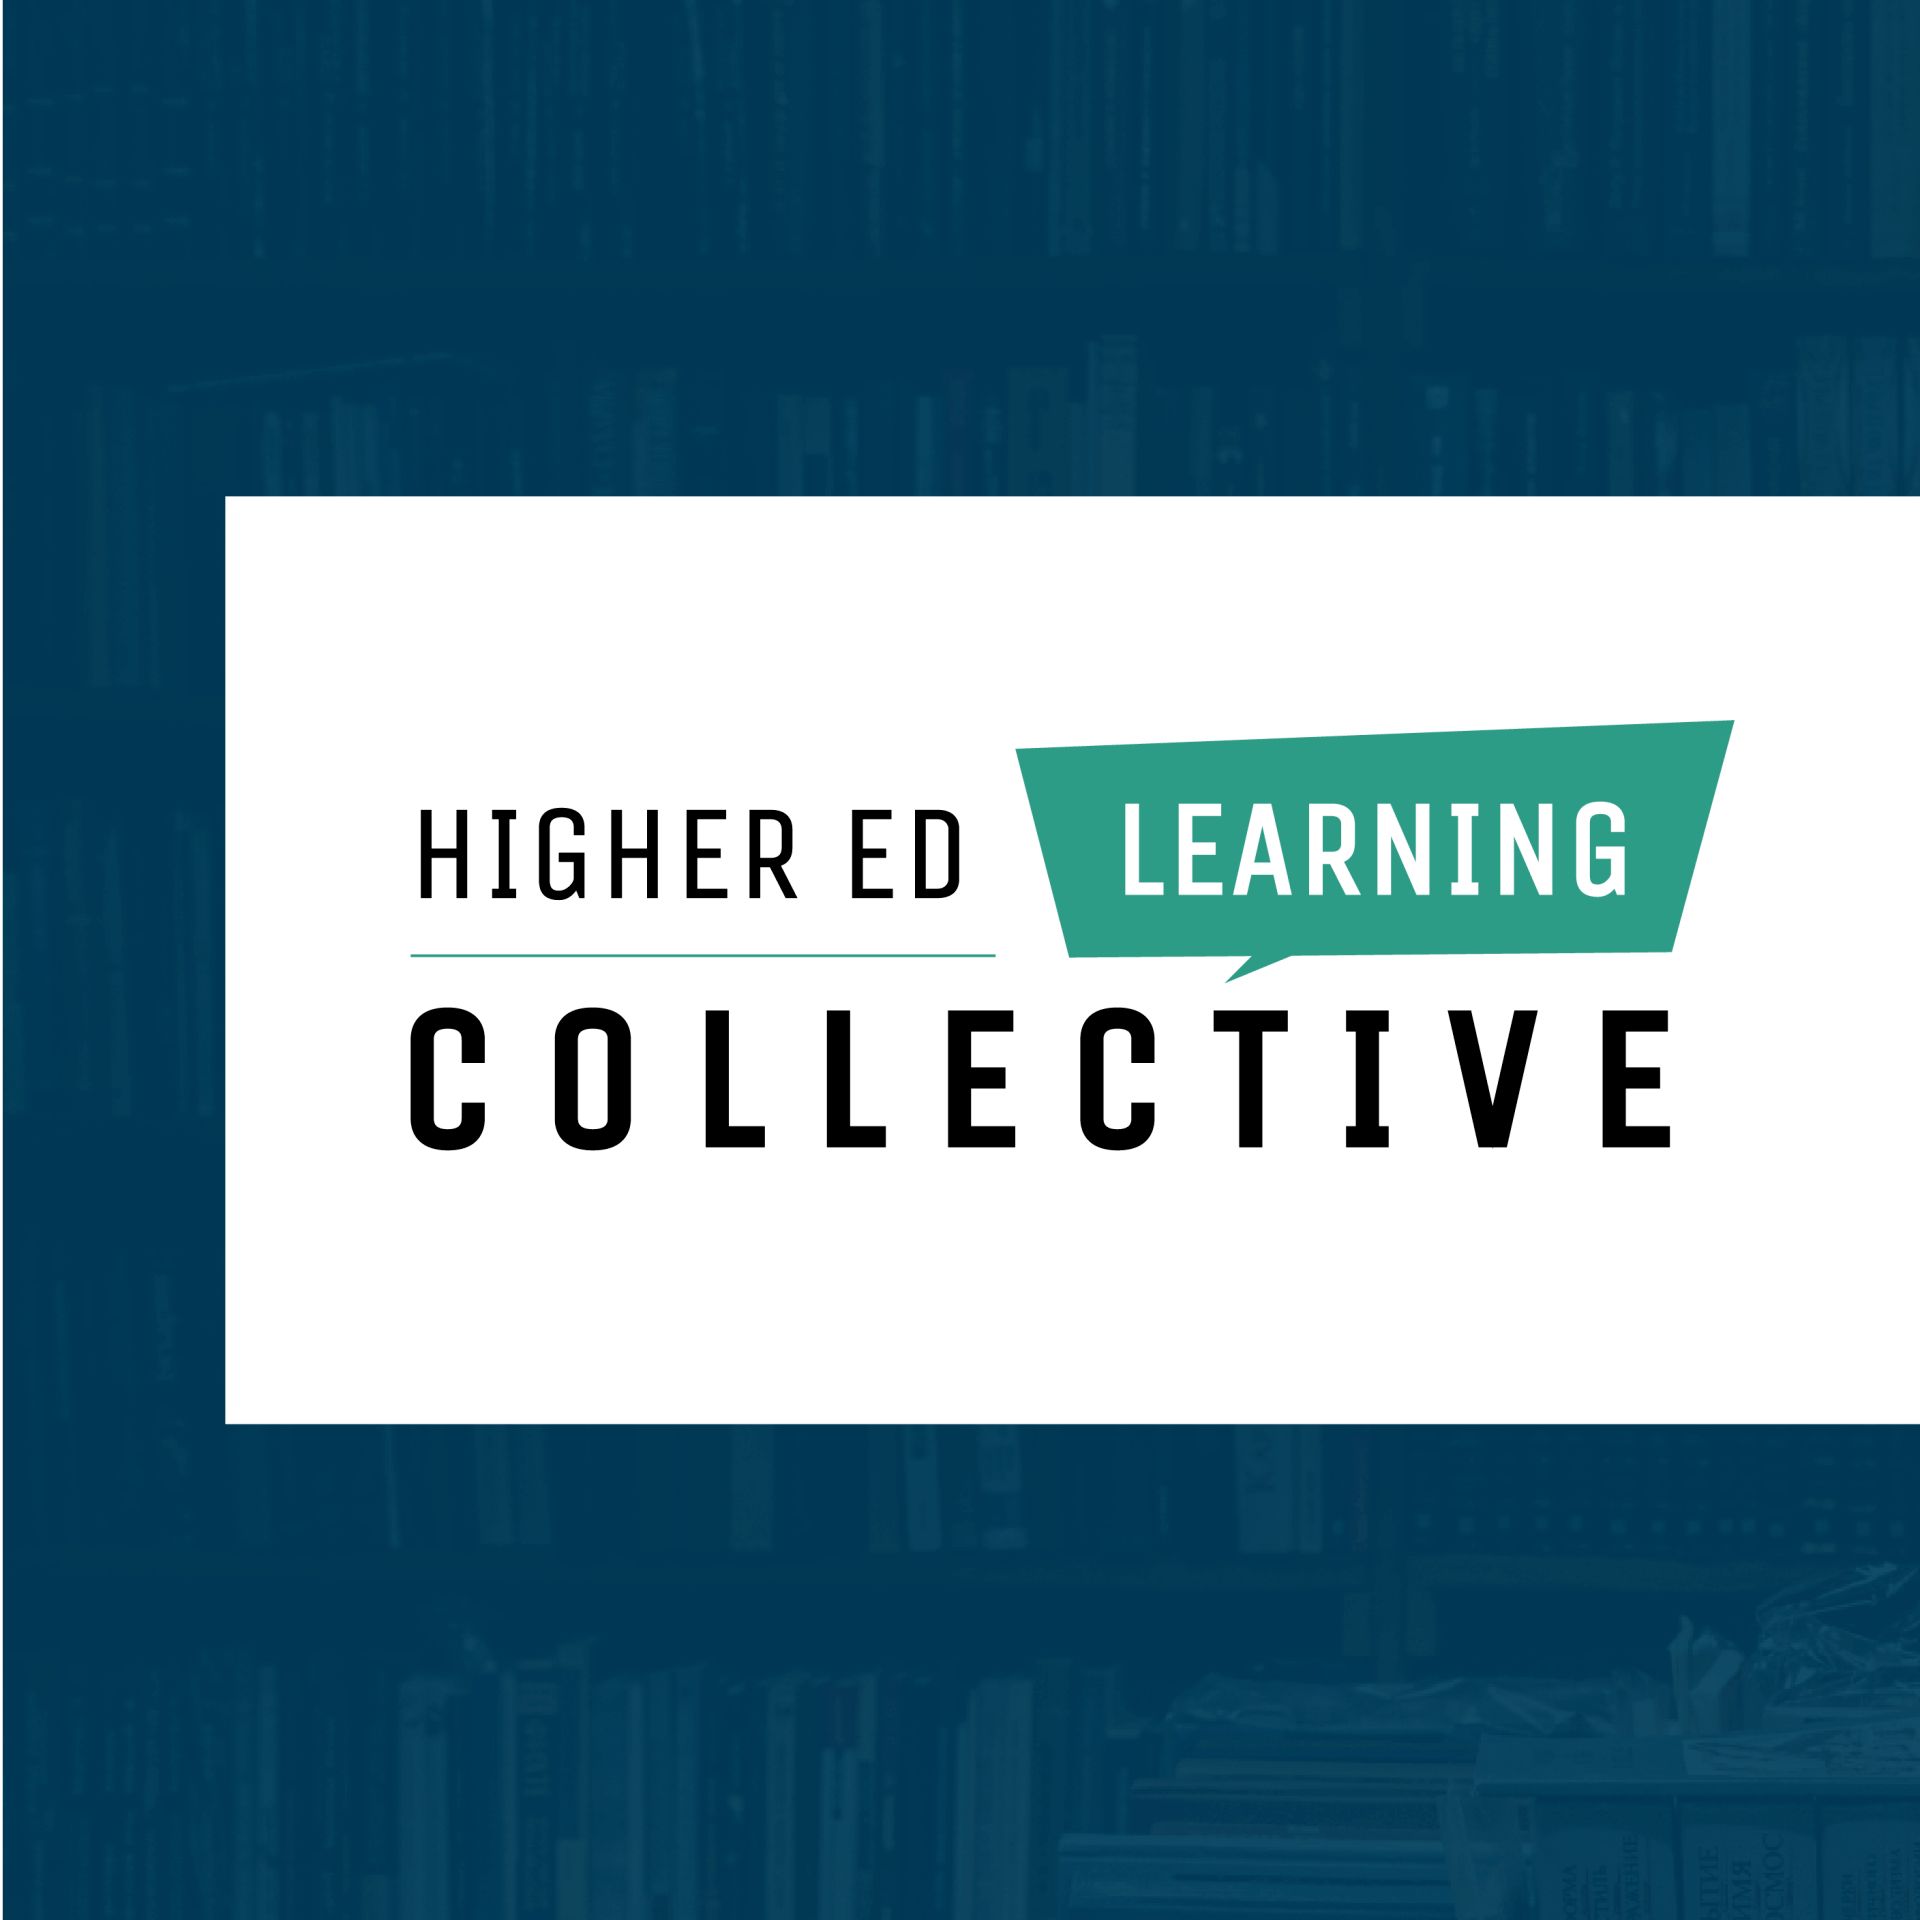 Screenshot of the logo for Higher Ed Learning Collective designed and developed by Turnquist House